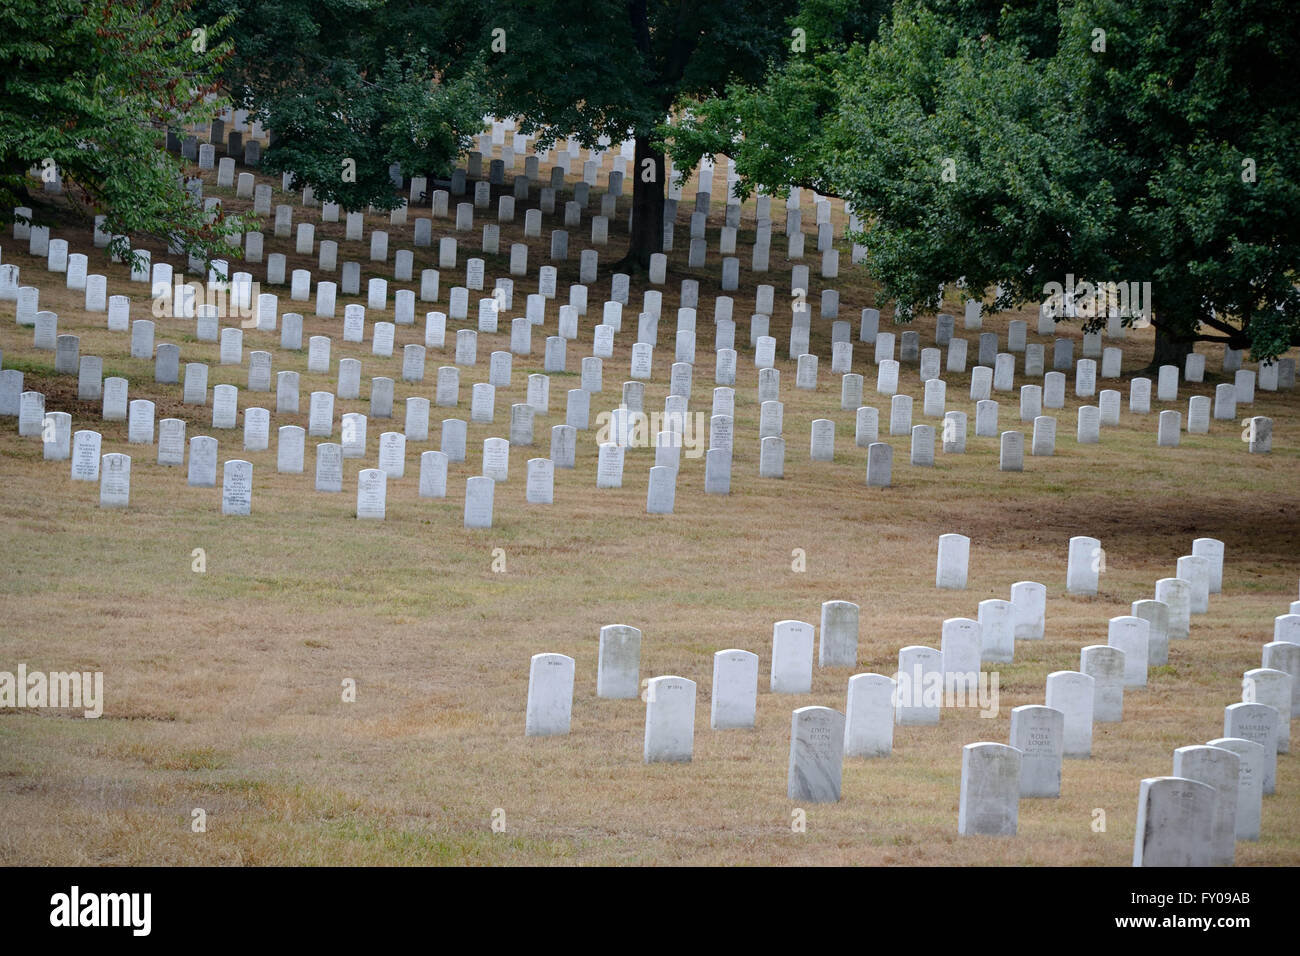 View of Headstones From Top of a Hill, Arlington National Cemetery, Virginia, USA Stock Photo